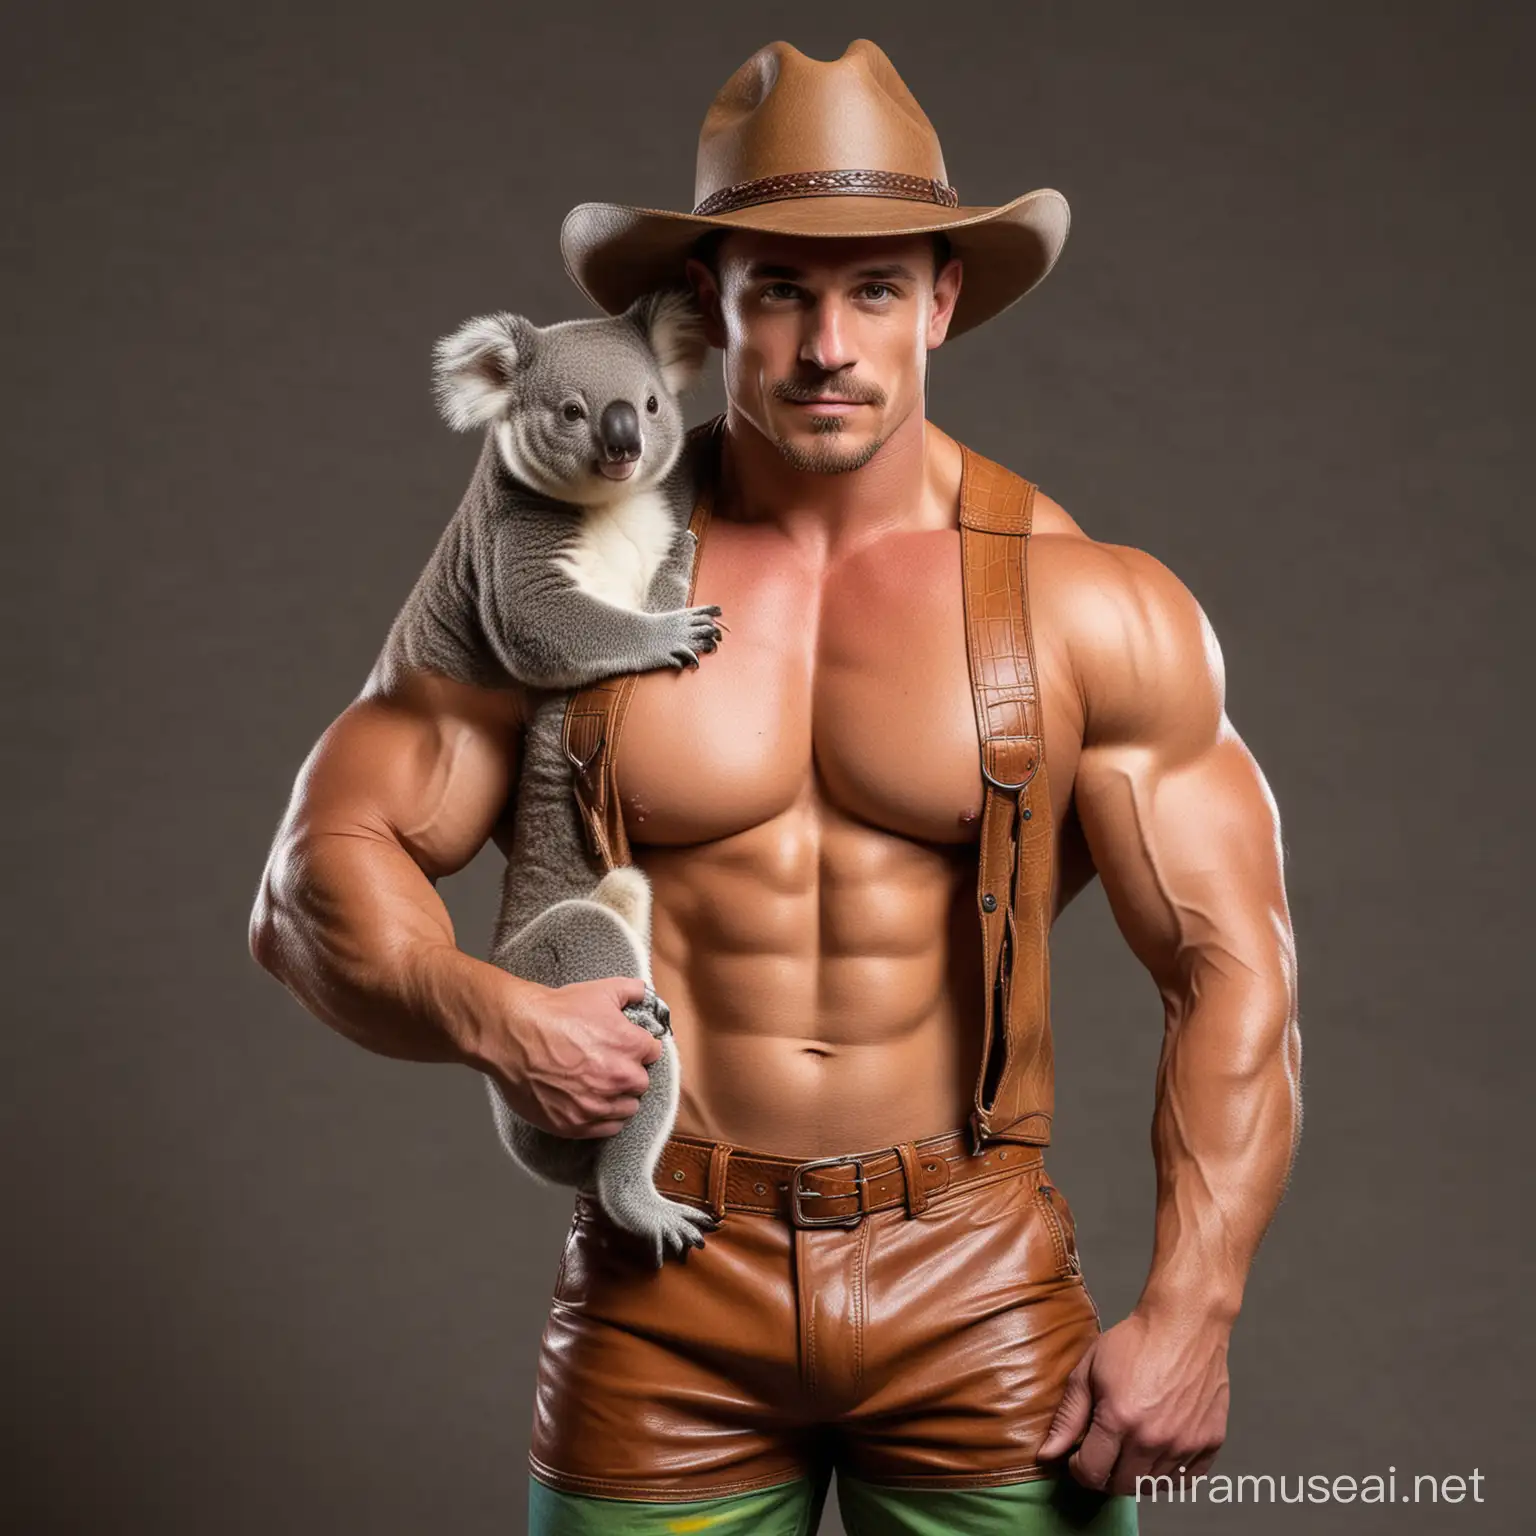 Muscular IFBB Pro Bodybuilder in Leather Vest with Crocodile Skin Shorts and Koala